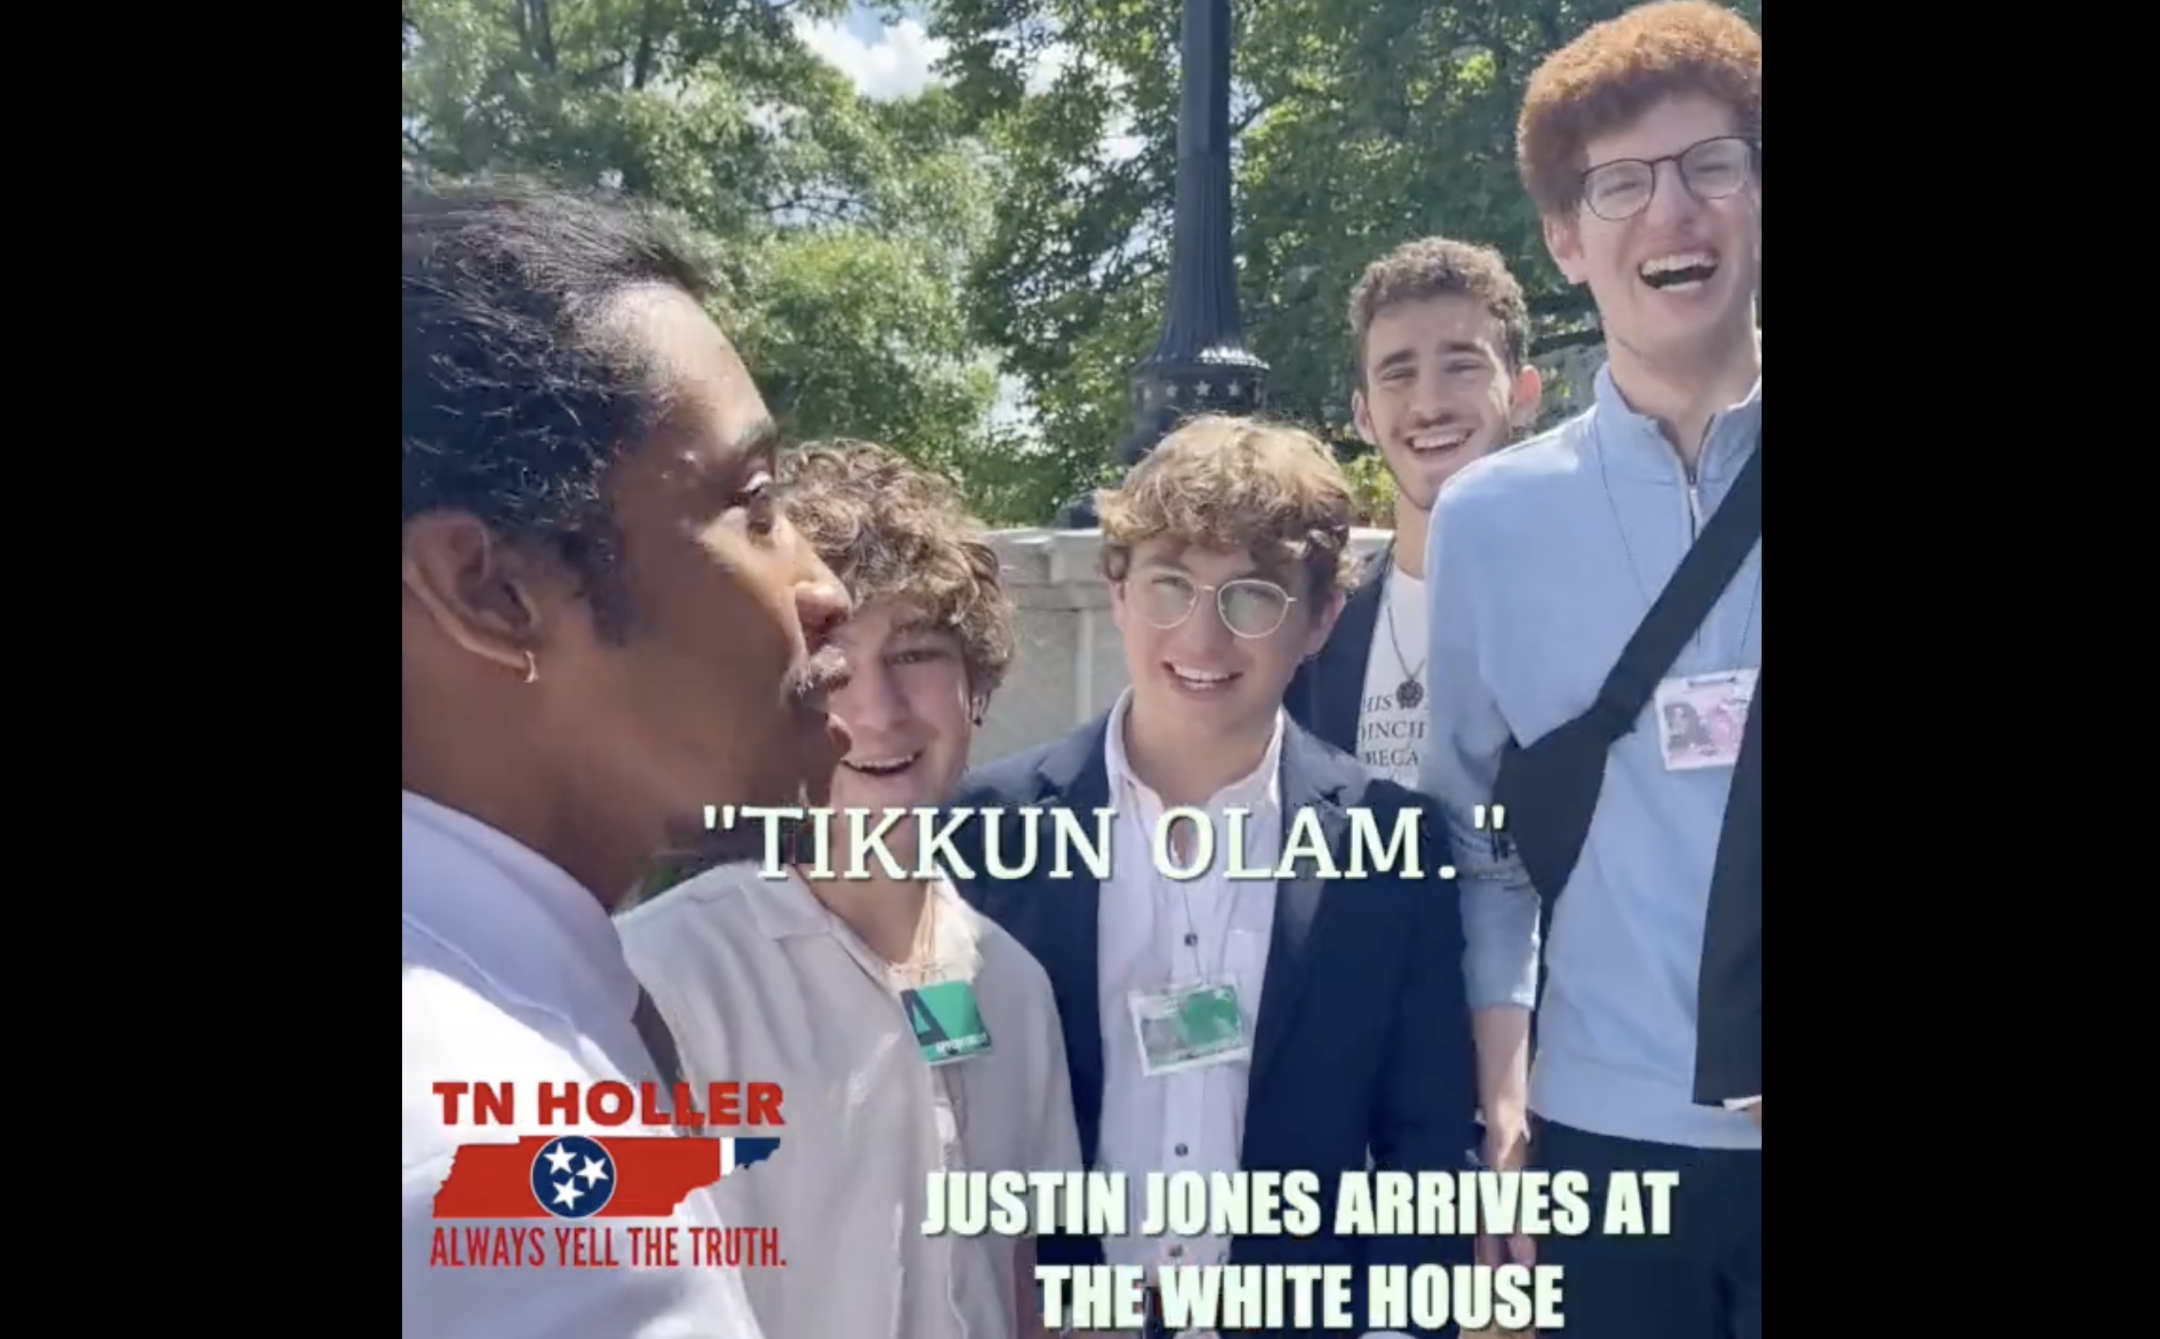 Jewish teens in the Bronfman Youth Fellows program were surprised when Tennessee Rep. Justin Jones invoked the Jewish concept of tikkun olam during an encounter with them in Washington, D.C. (Screenshot from TN Holler video)